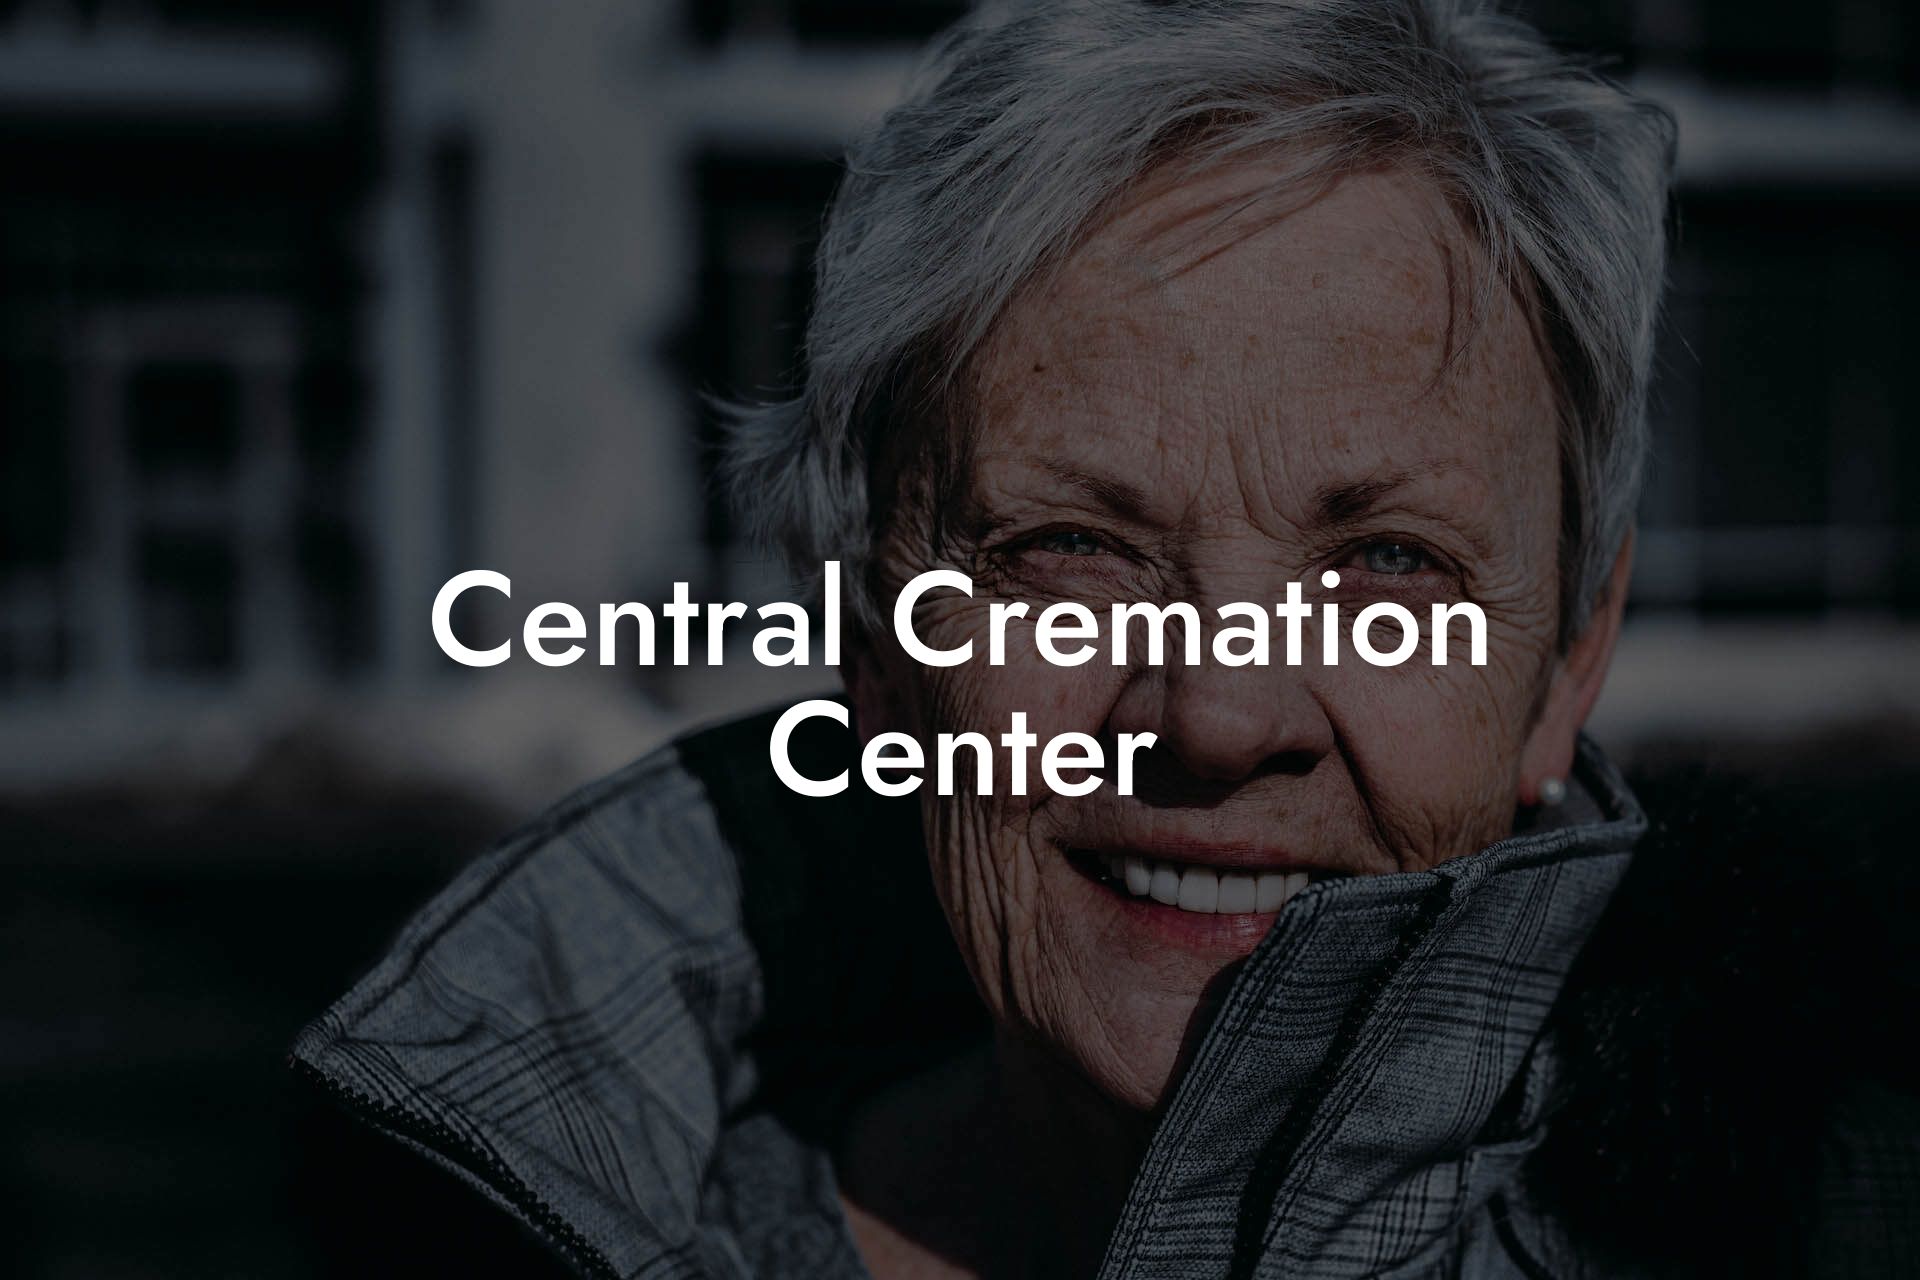 Central Cremation Center